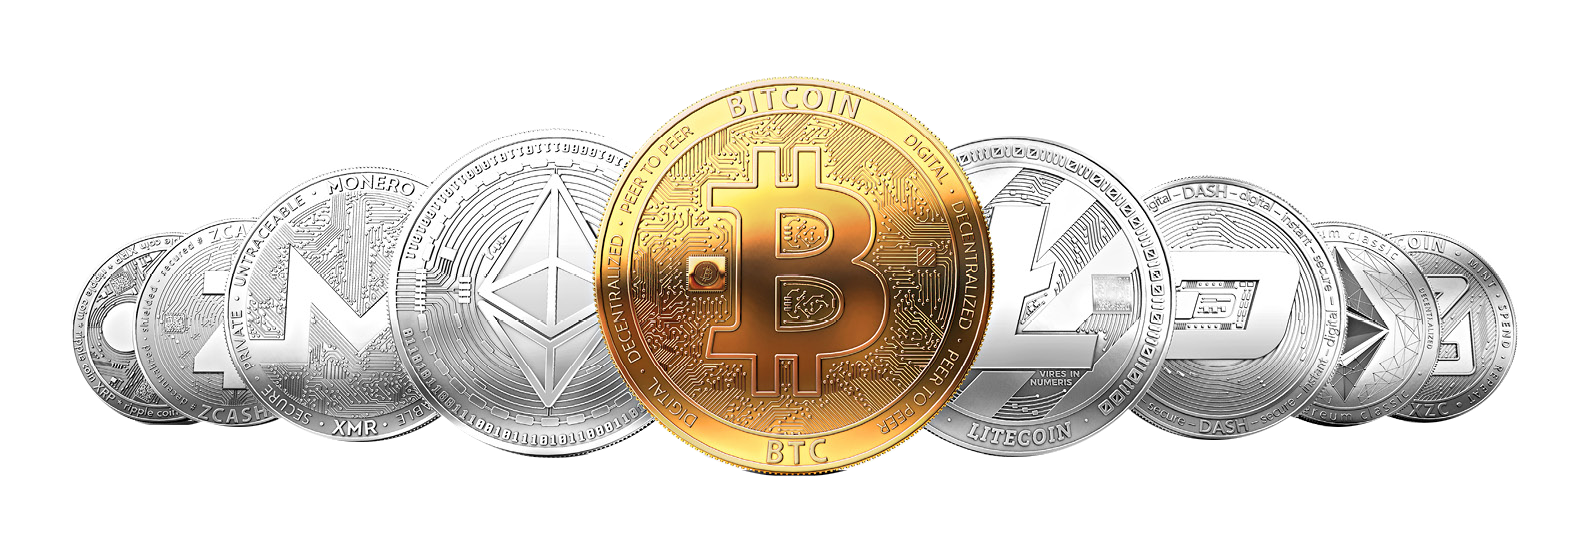 Cryptocurrency Token Coin Blockchain Bitcoin HD Image Free PNG PNG Image